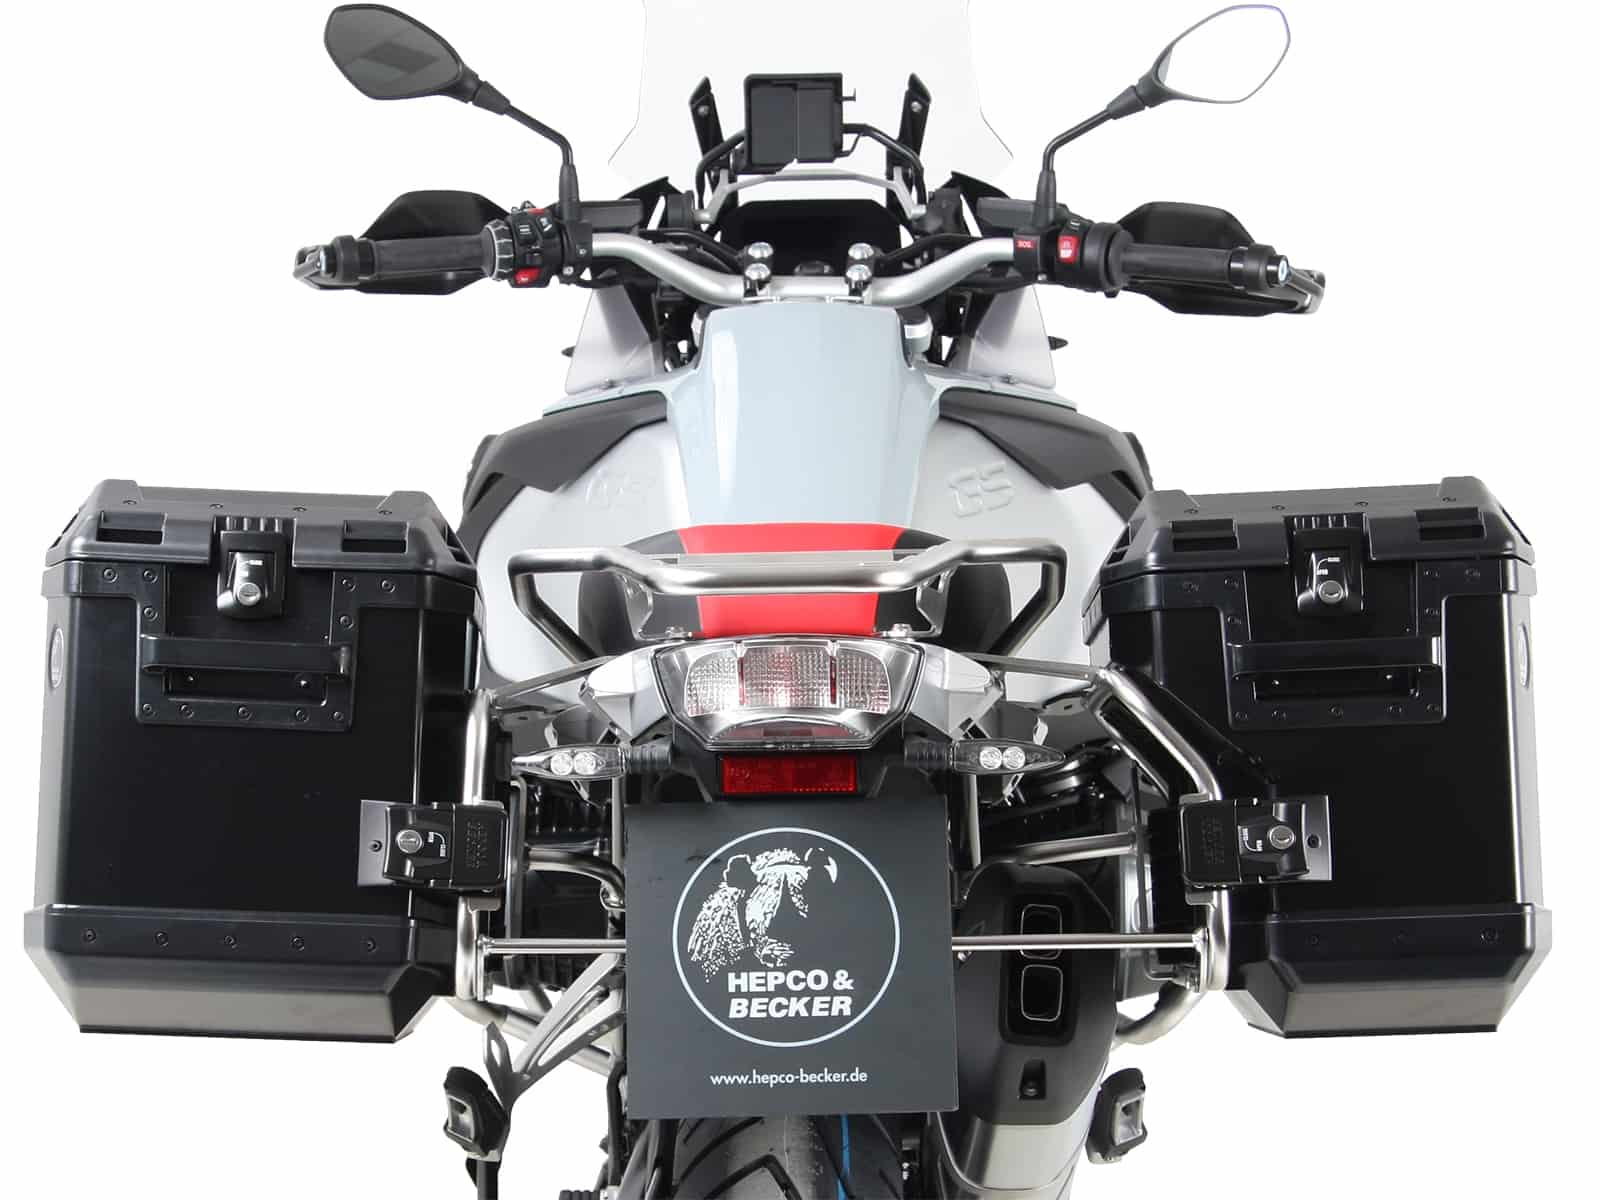 Sidecarrier Cutout stainless steel incl. Xplorer sideboxes silver for BMW R1250GS Adventure (2019-)